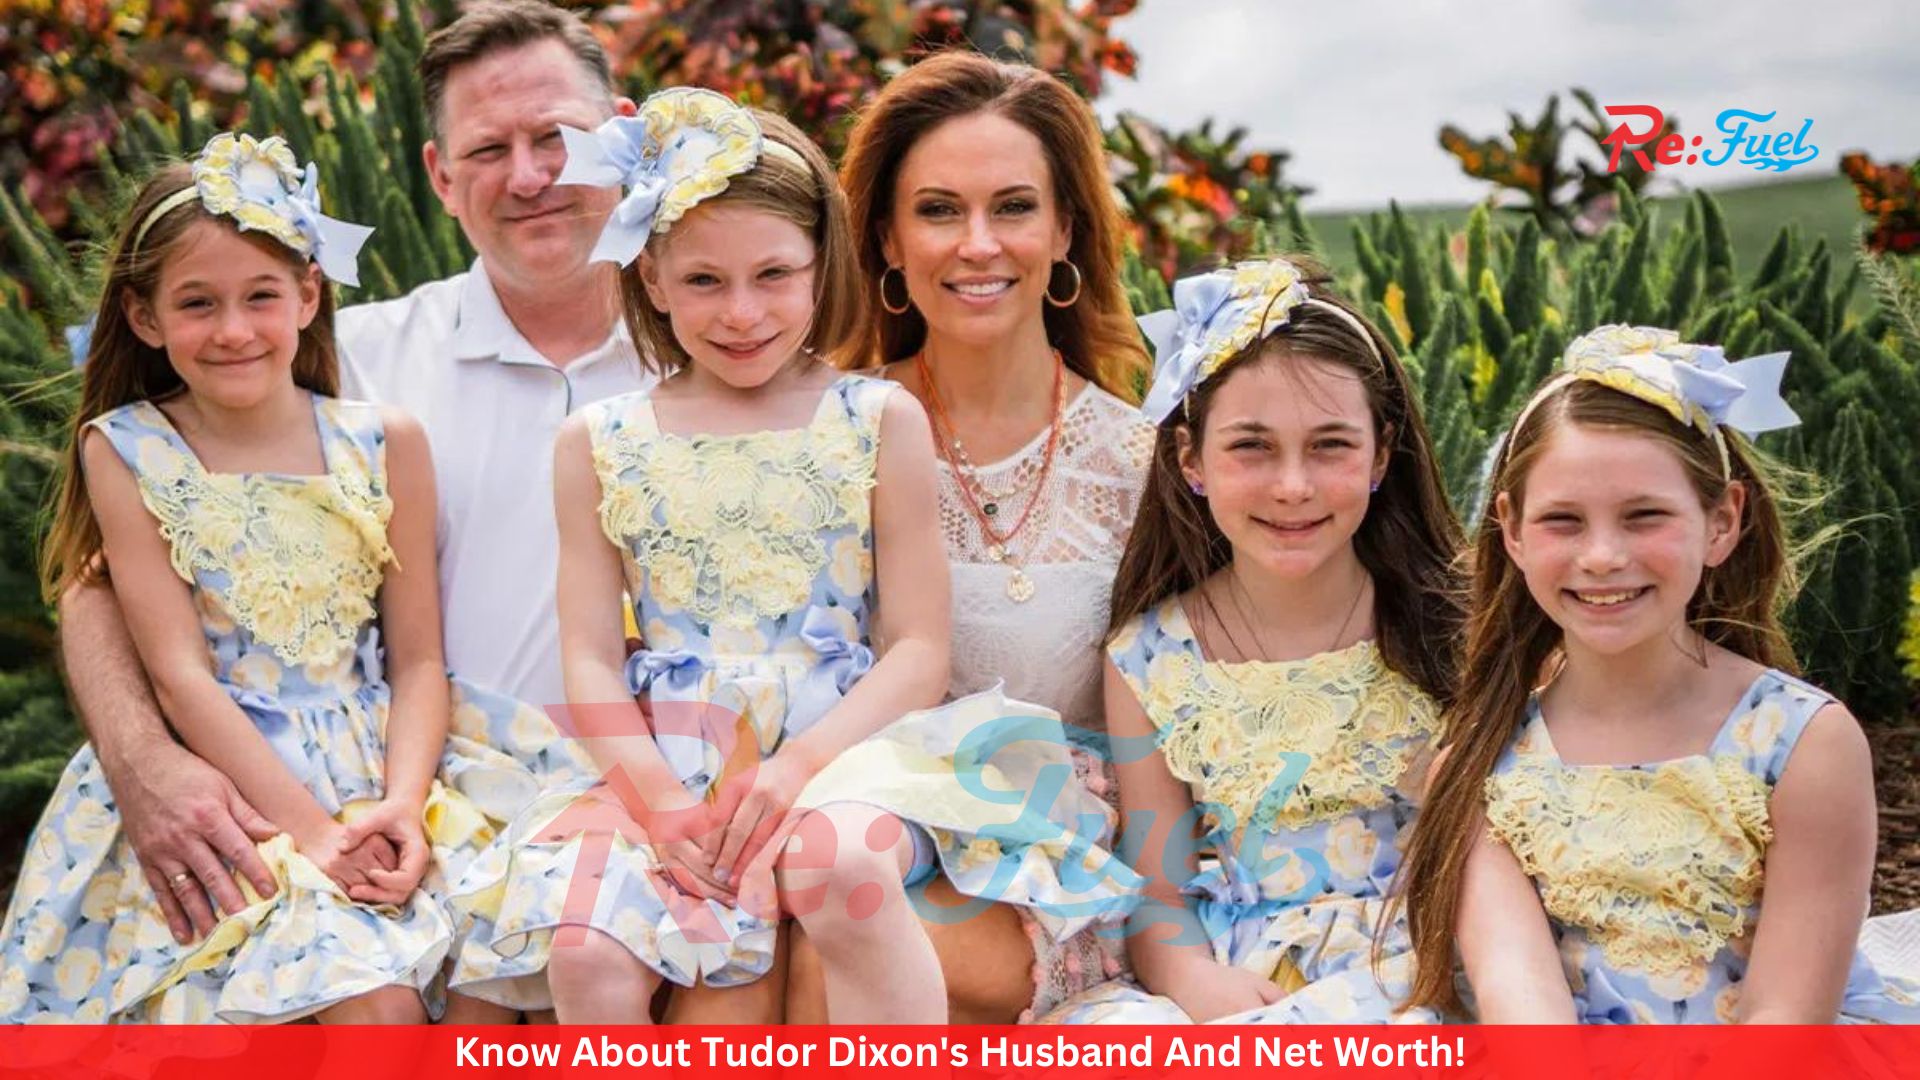 Know About Tudor Dixon's Husband And Net Worth!